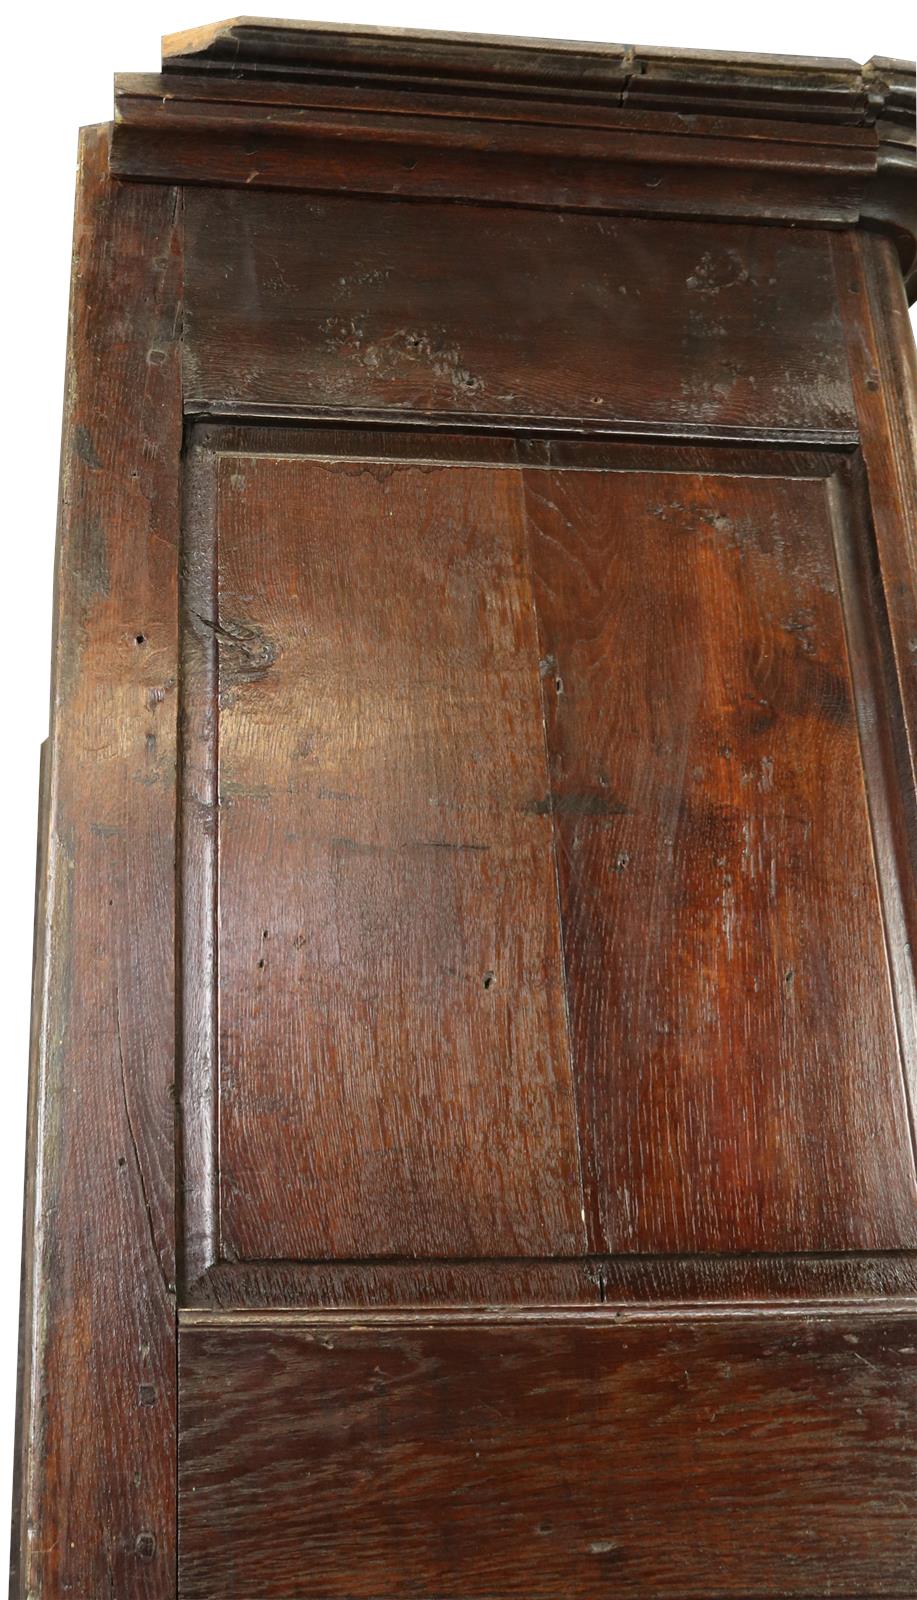 Armoire Antique French Provincial Very Old 1790 Oak Wood Peg Construction Heart -Image 11